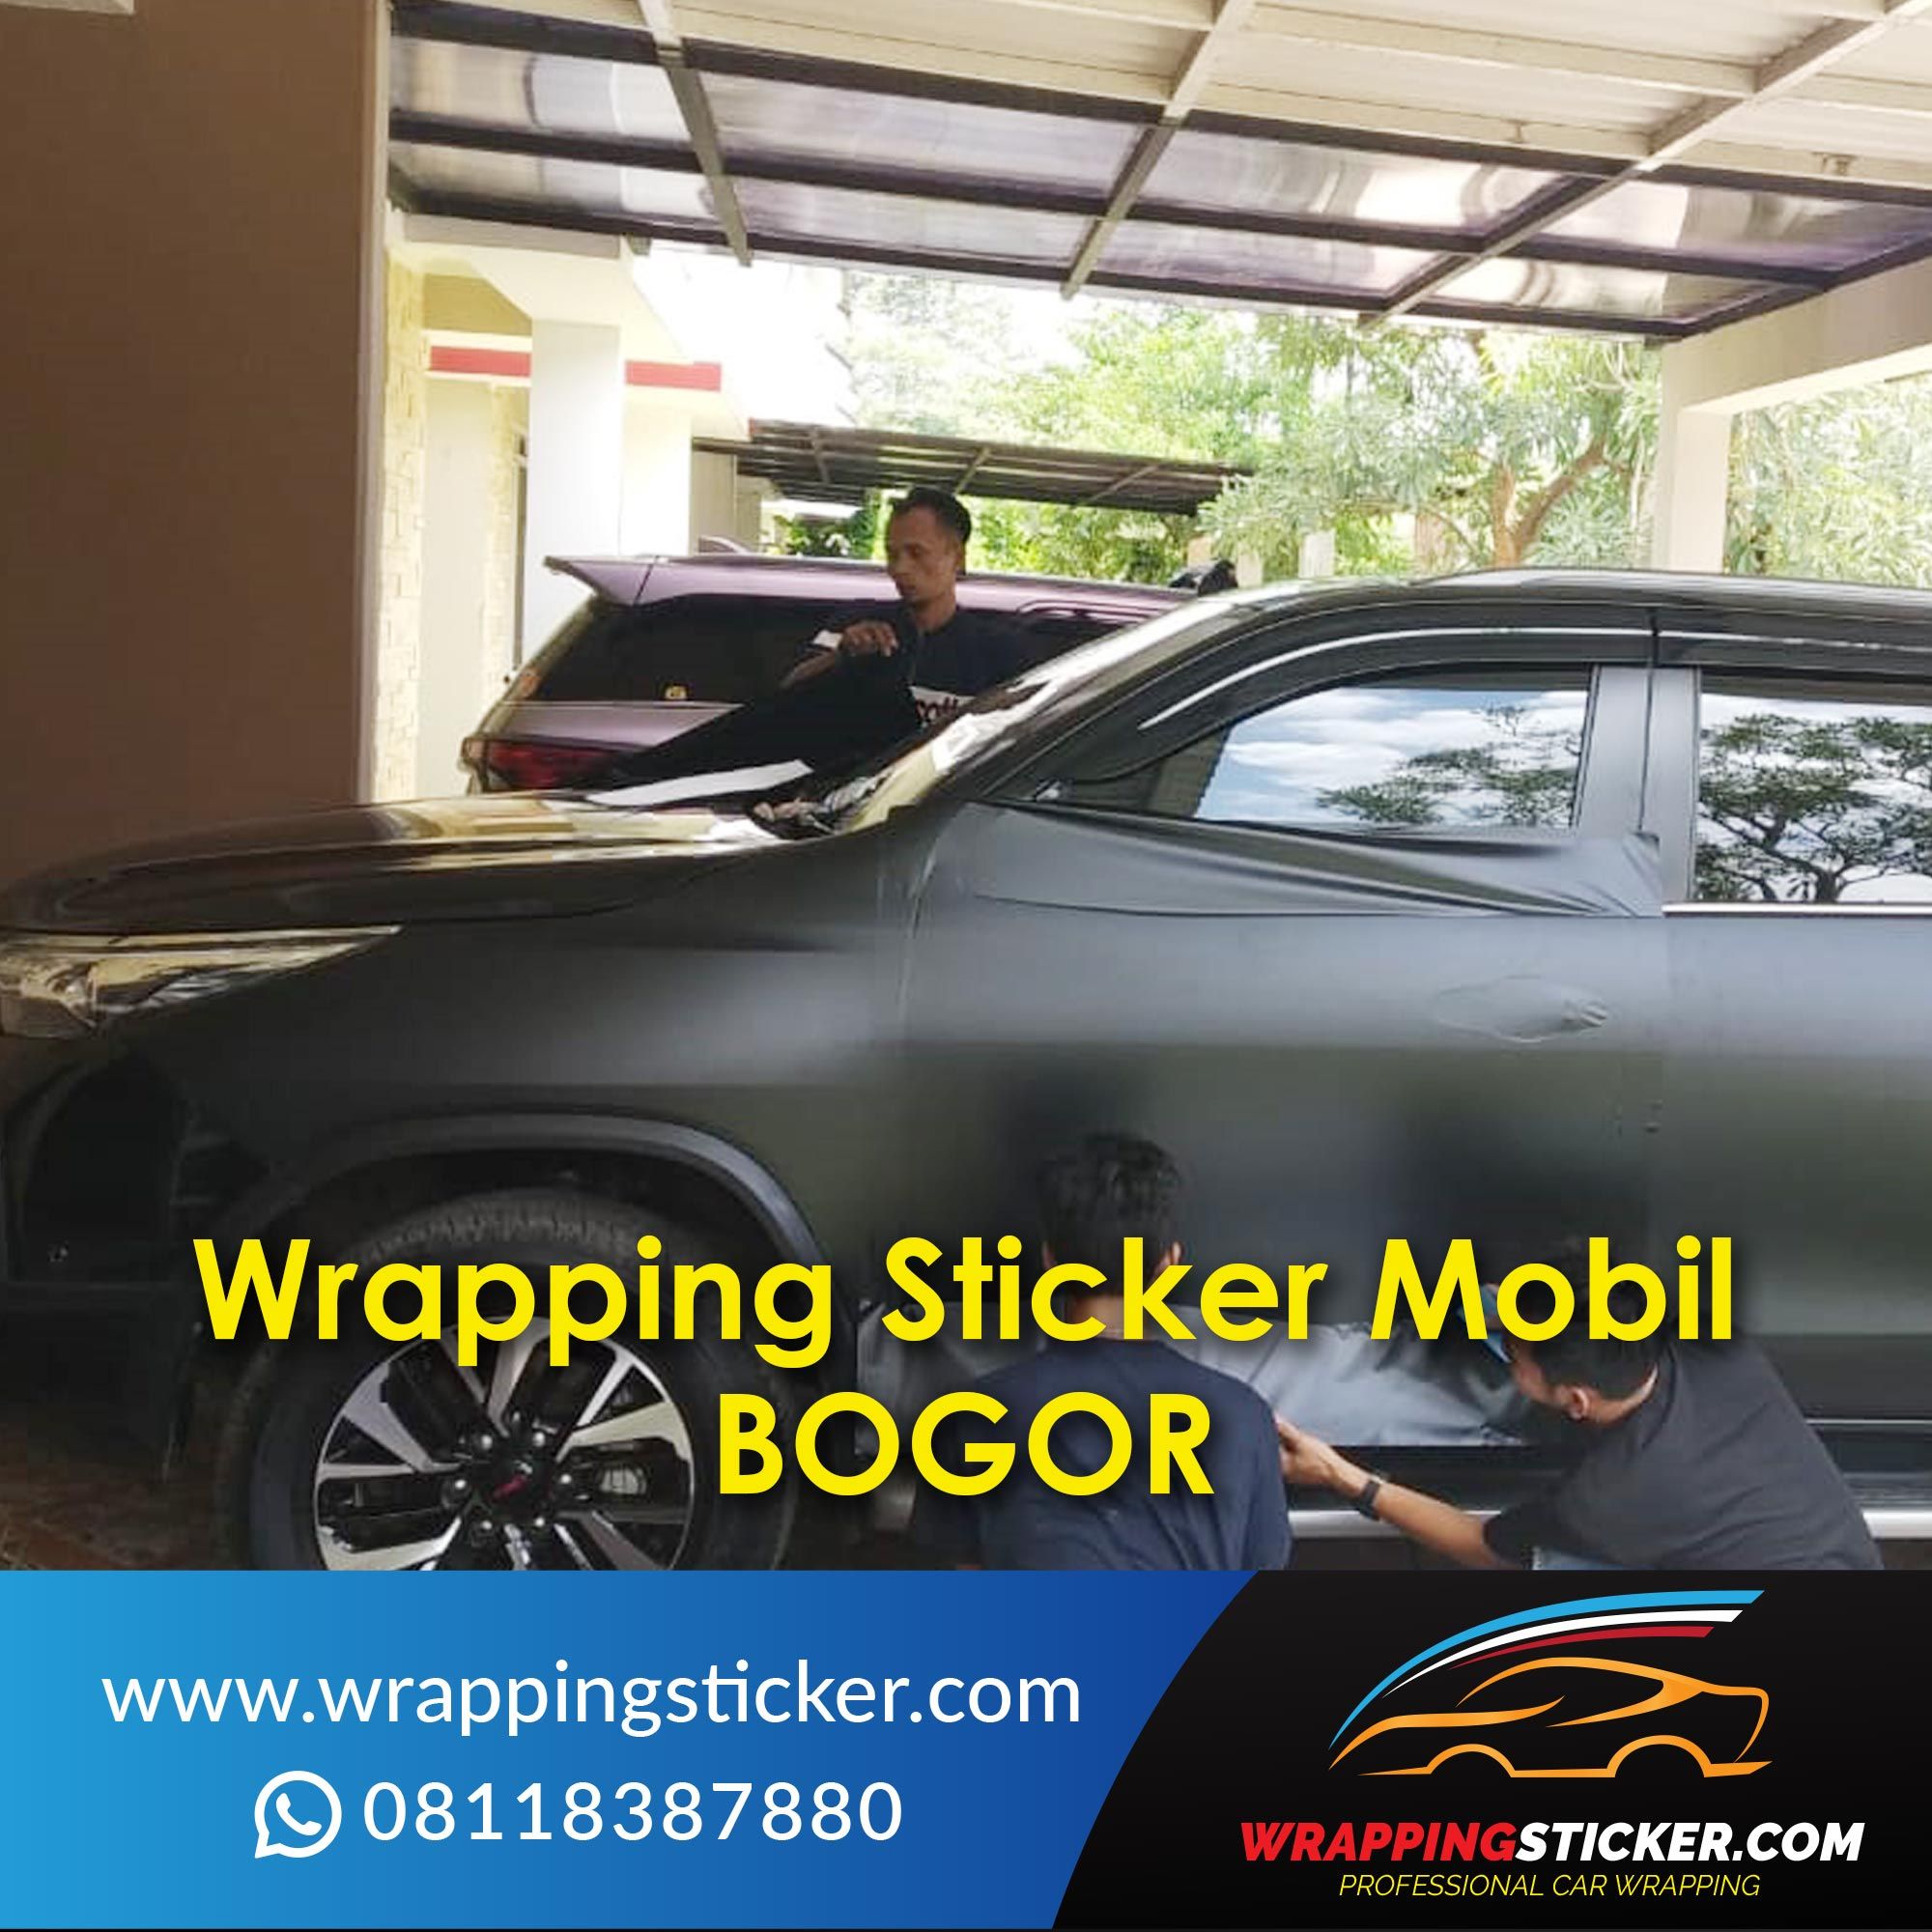 Wrapping Sticker Mobil Bogor